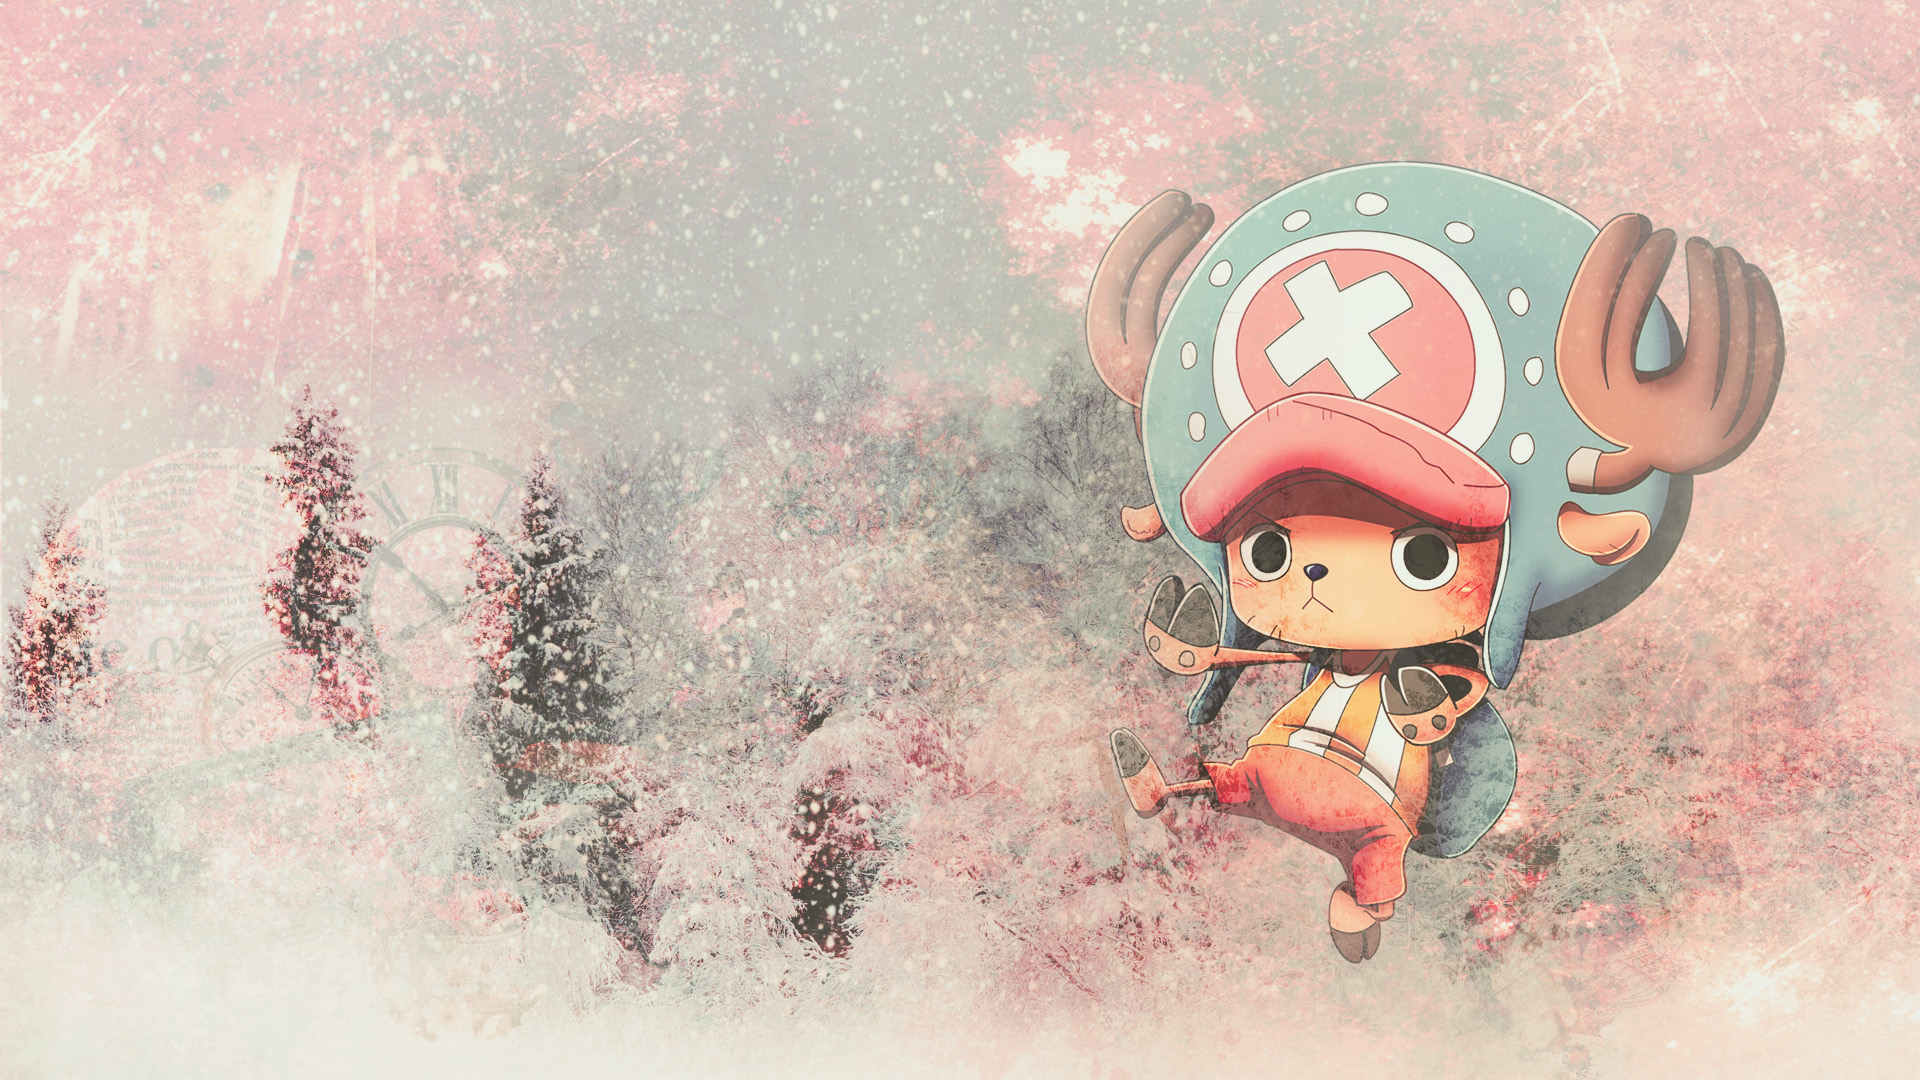 1920x1080 240+ Tony Tony Chopper HD Wallpapers and Backgrounds